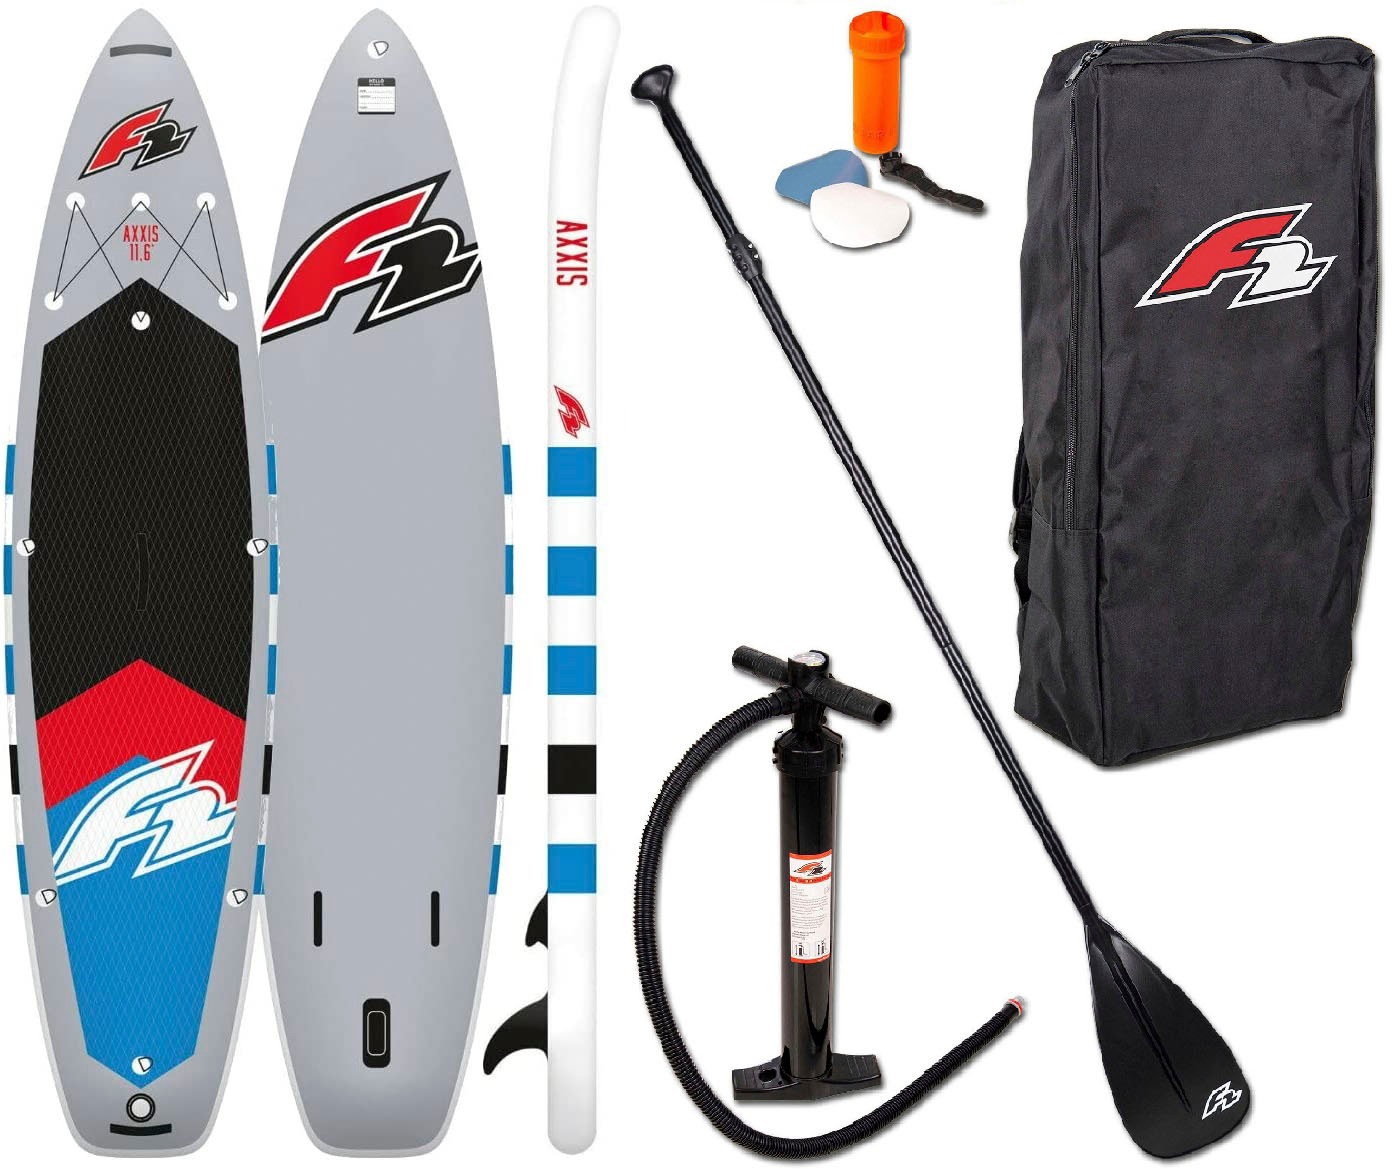 F2 Inflatable SUP-Board kaufen (Packung, 11,6 grey«, tlg.) OTTO 5 »Axxis bei